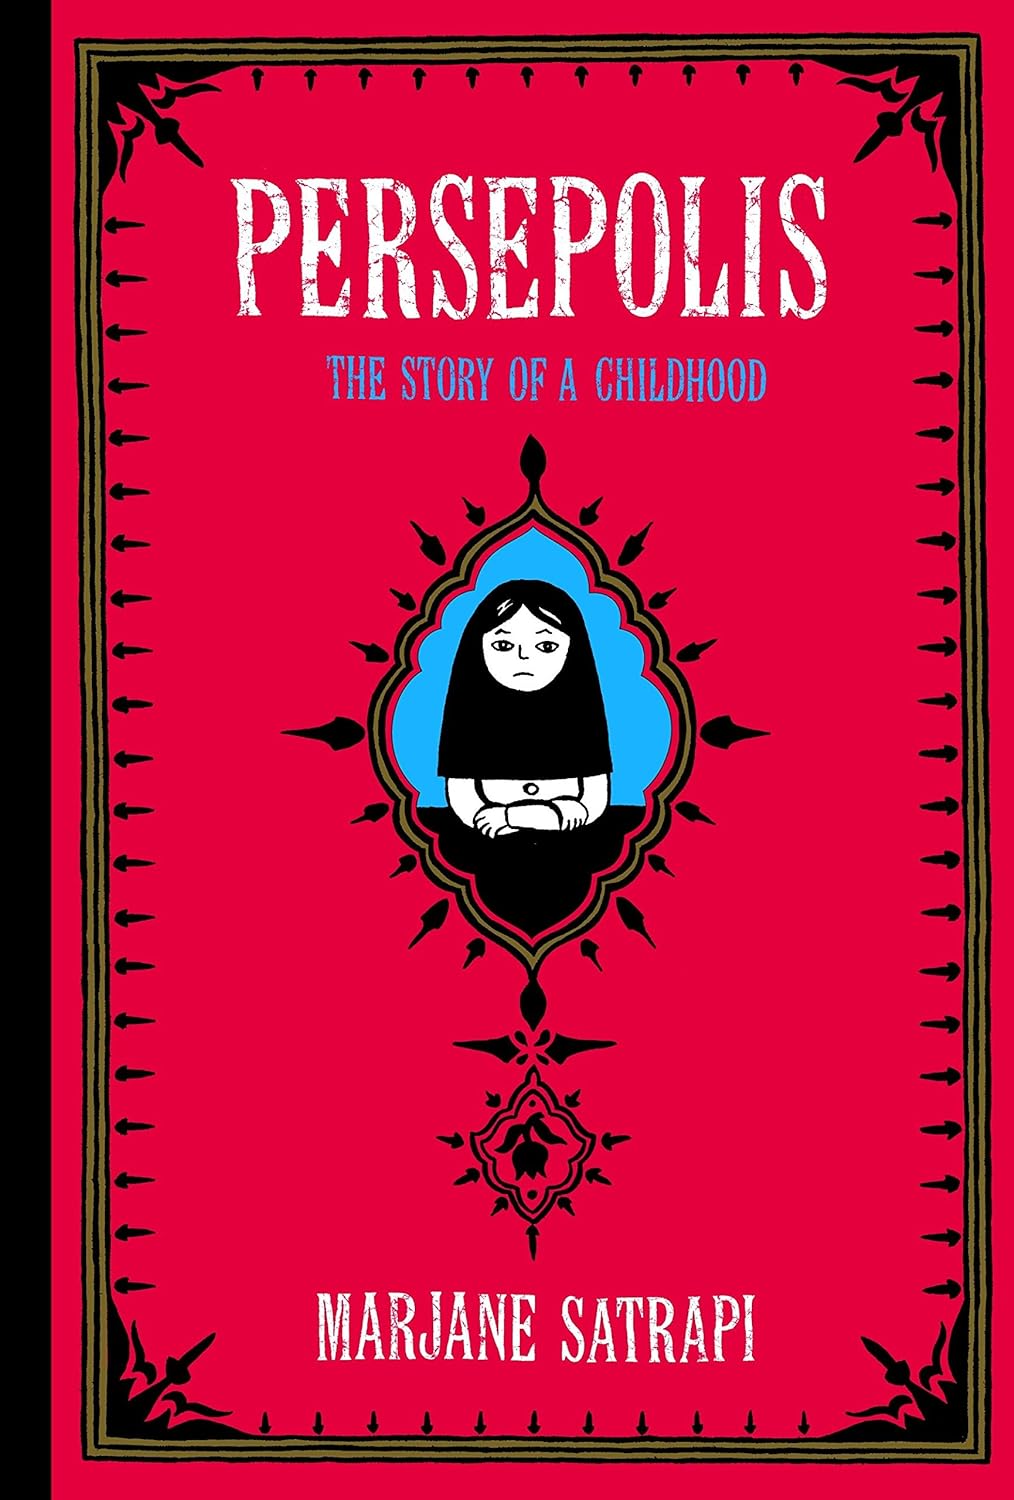 “Persepolis The Story of a Childhood” by Marjane Satrapi (2000)